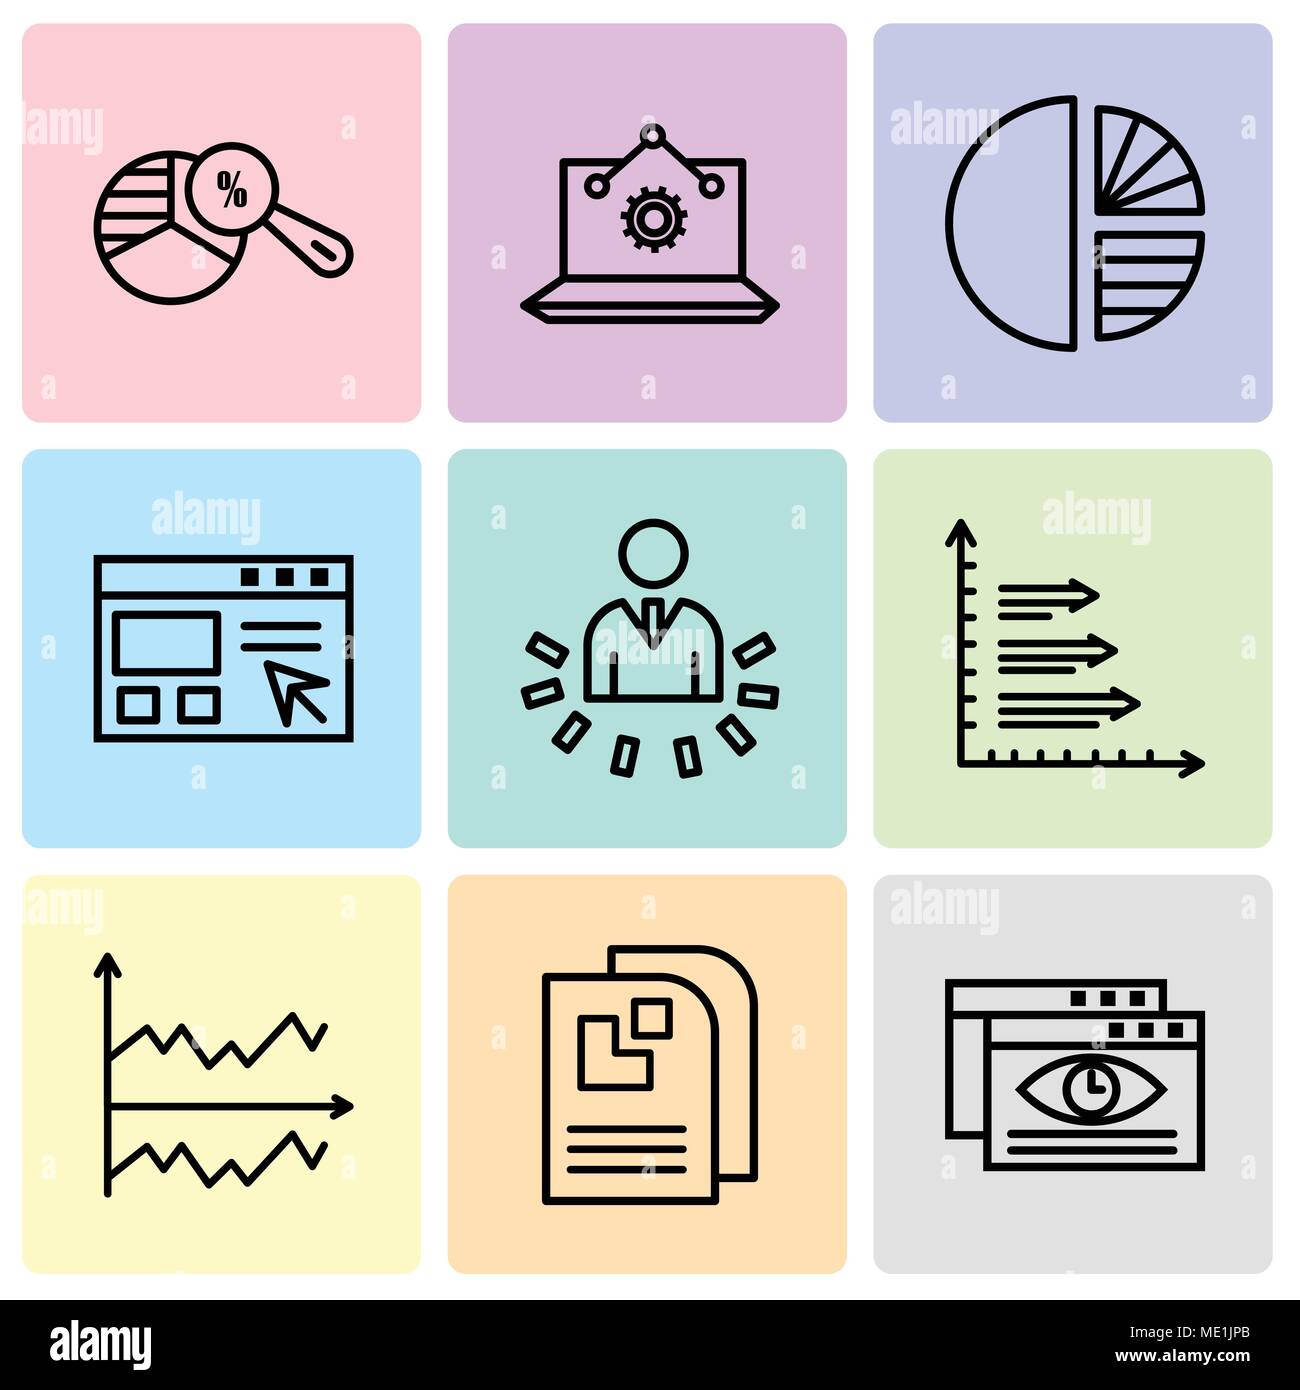 Set Of 9 simple editable icons such as Data viewer, Data page, Chart, Bars, User data analytics, Data import interface, Simple chart, Laptop Analysis, Stock Vector